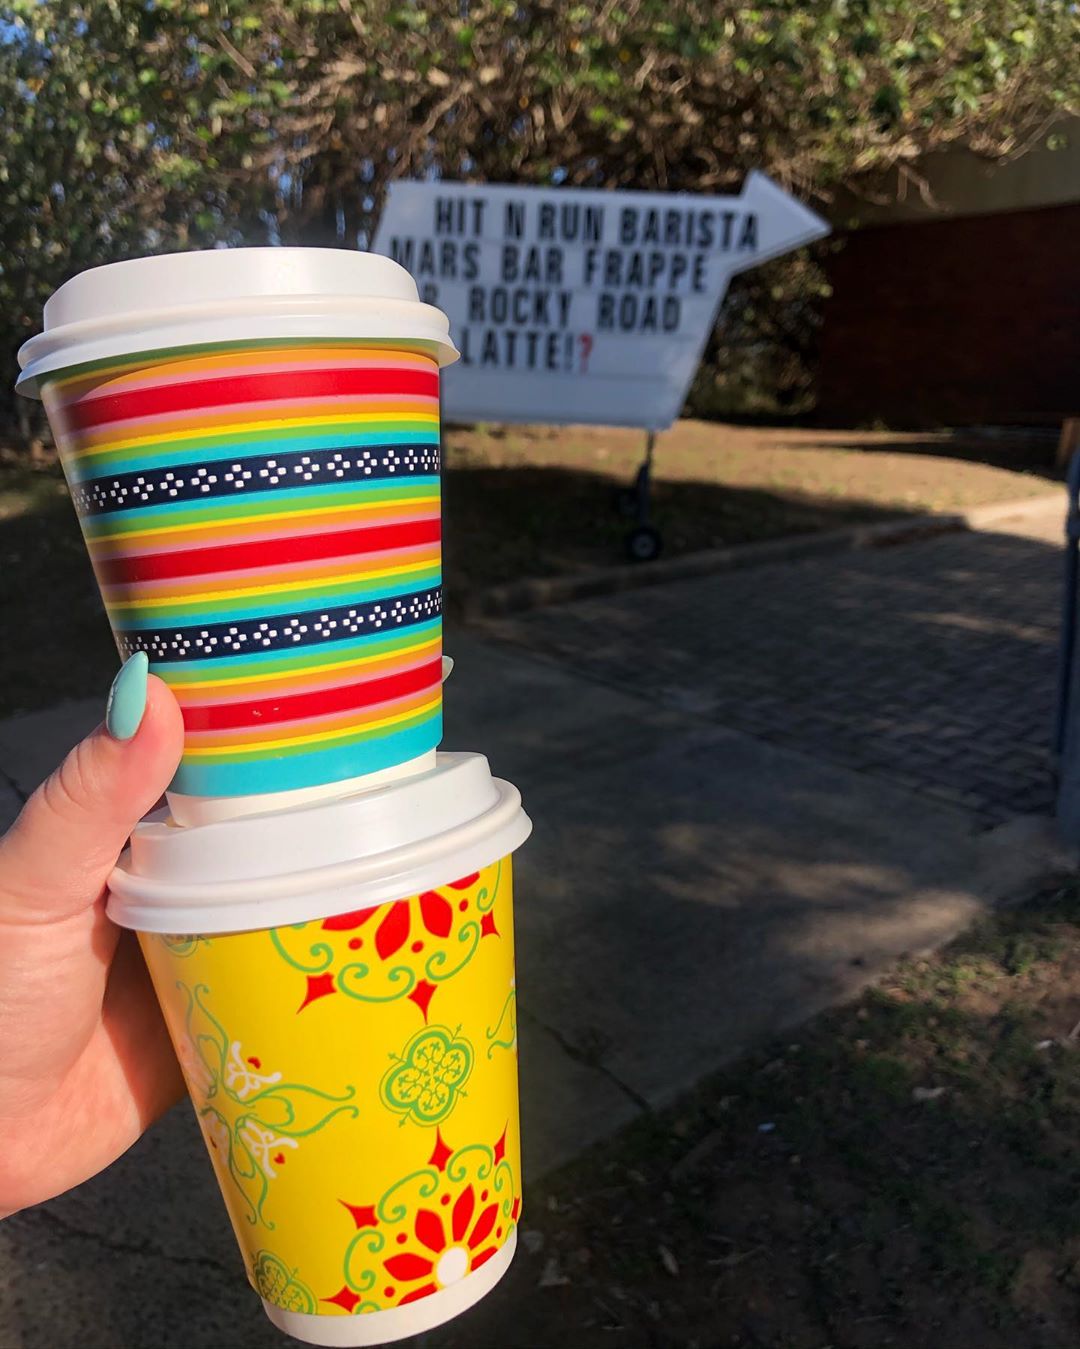 Hand holding two colorful cups of coffee. Photo by Instagram user @hitnrunbarista